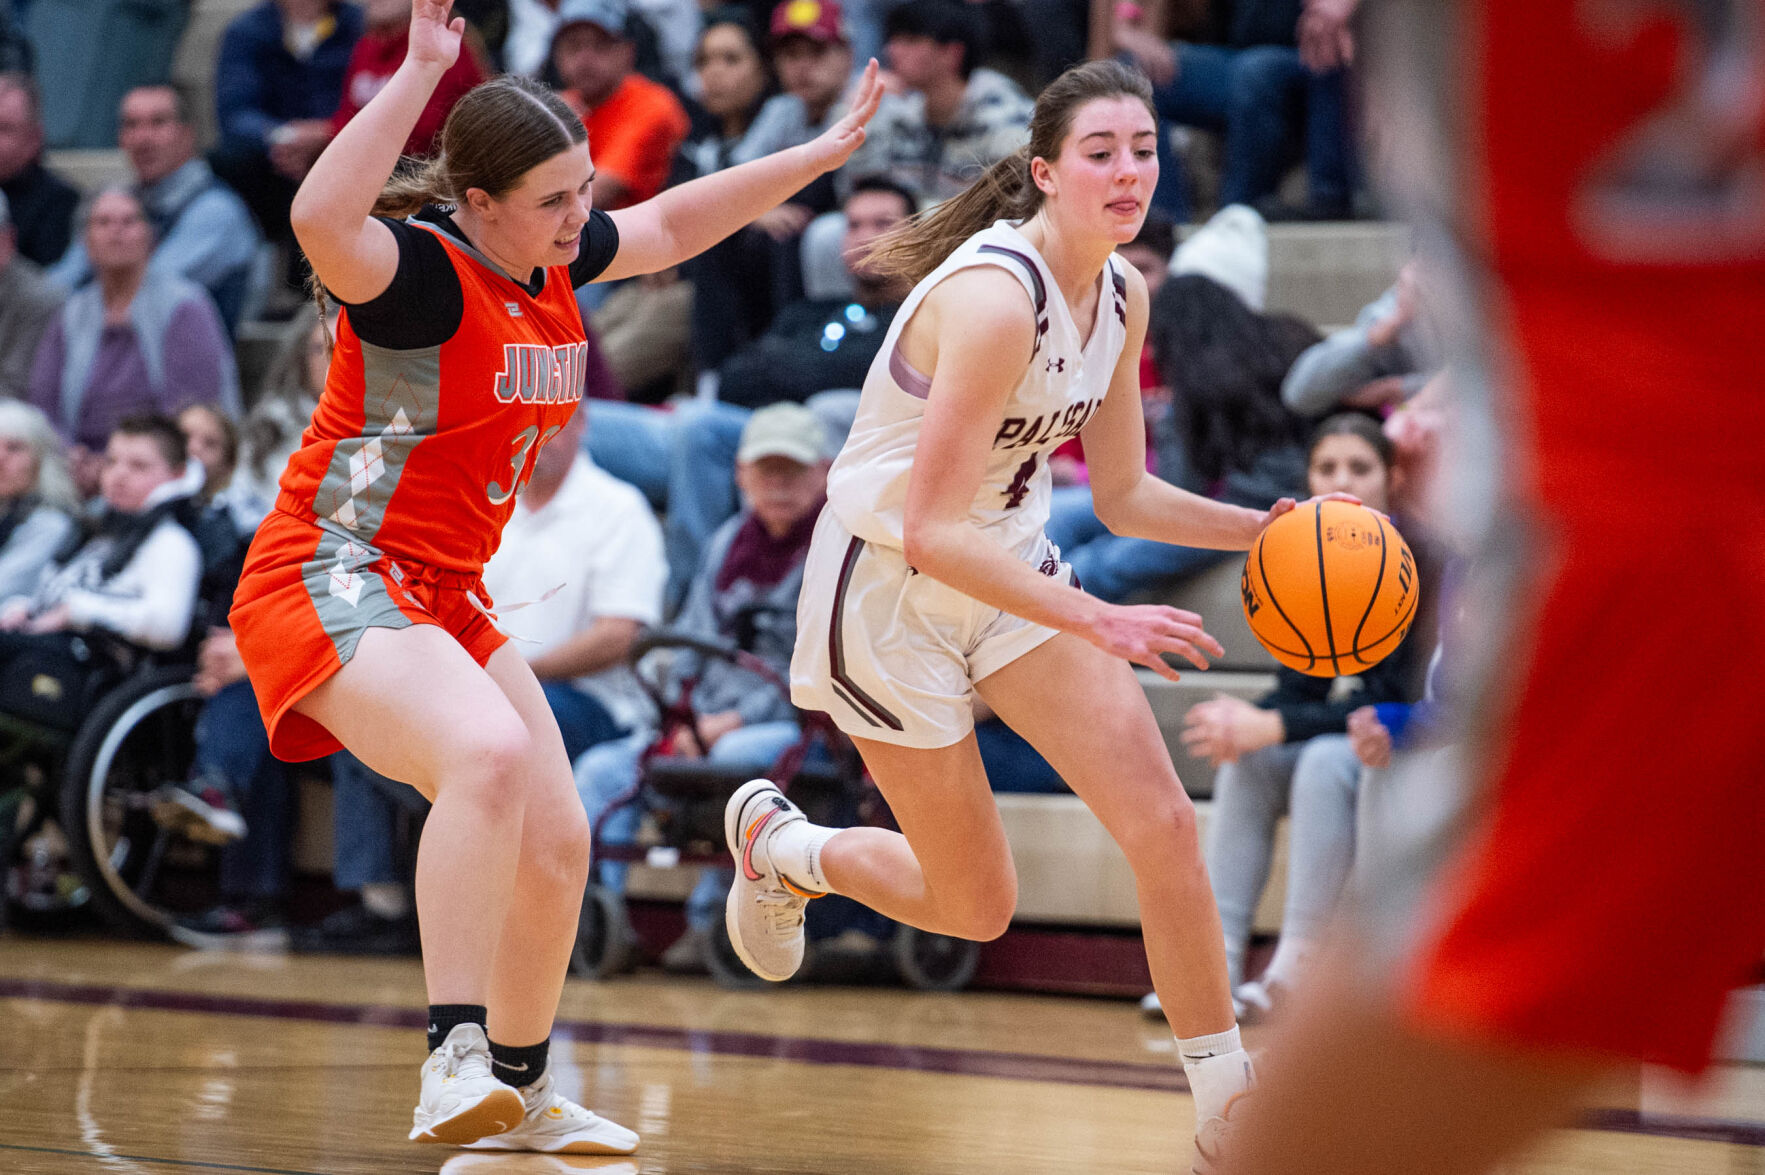 Palisade High School Girls Basketball Team Thriving with Youthful Energy and Strong Team Chemistry